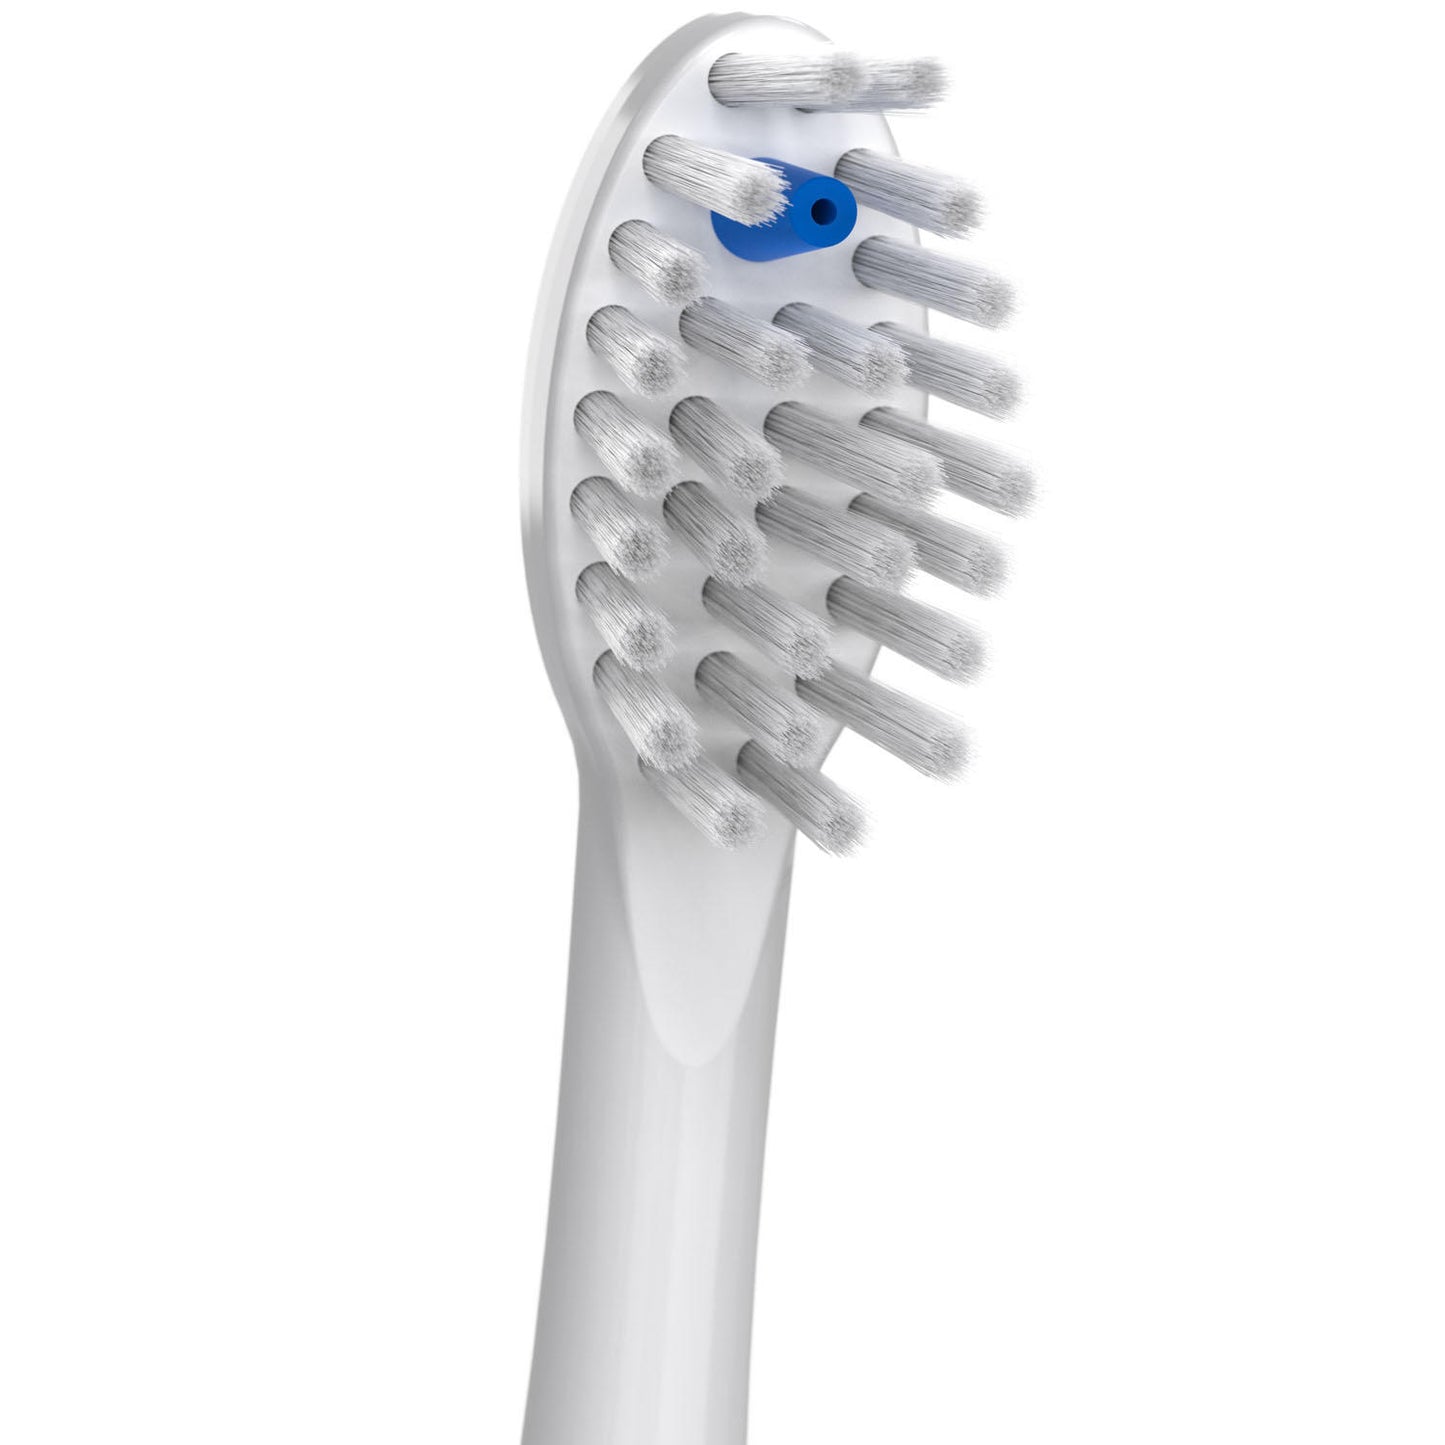 Waterpik Sonic-Fusion Full-Size Replacement Flossing Toothbrush Heads,White (6 pk.)